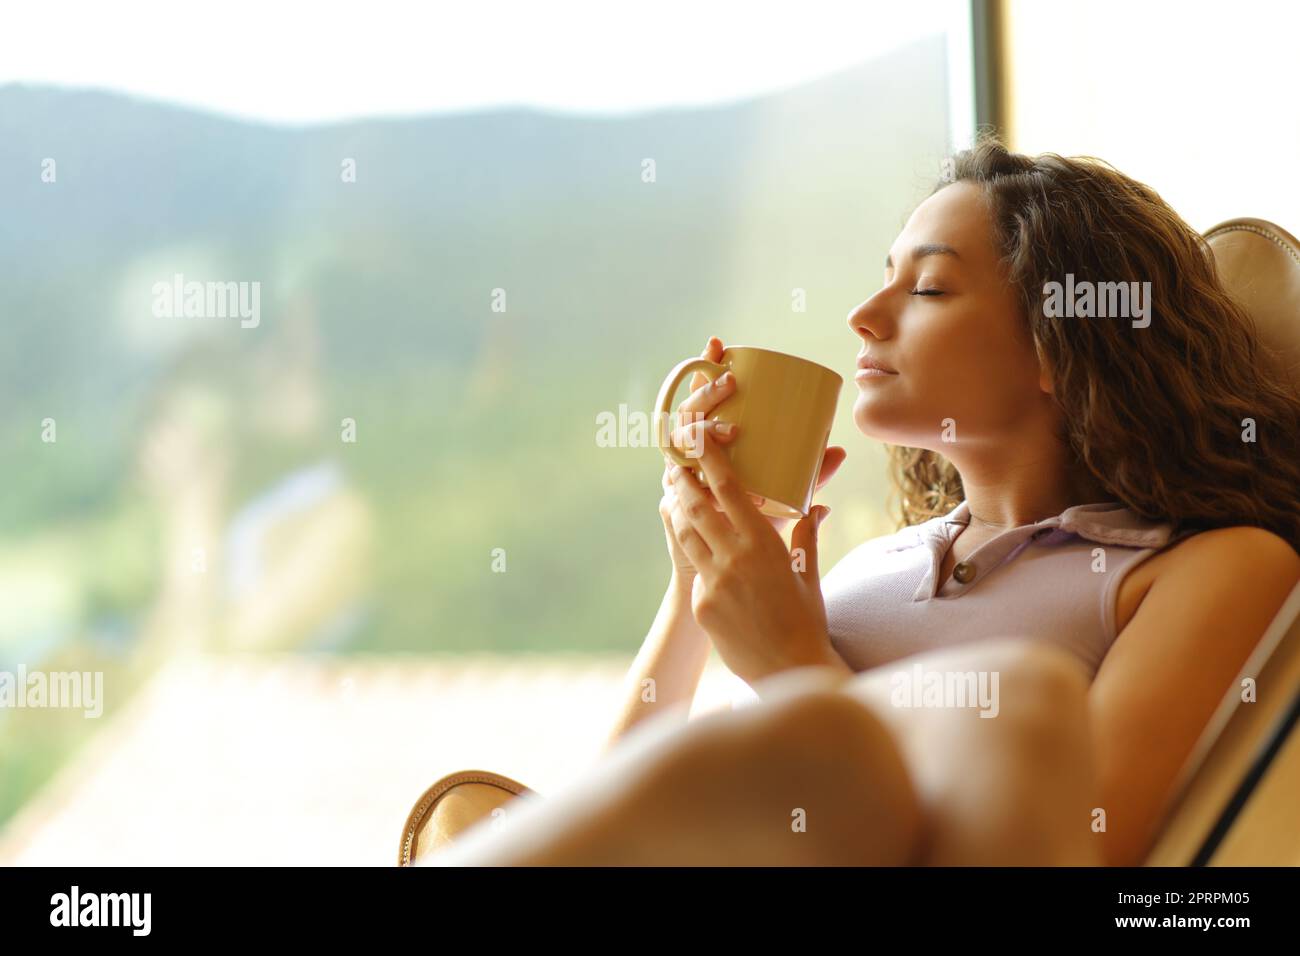 Woman sitting on a chair relaxing drinking coffee Stock Photo